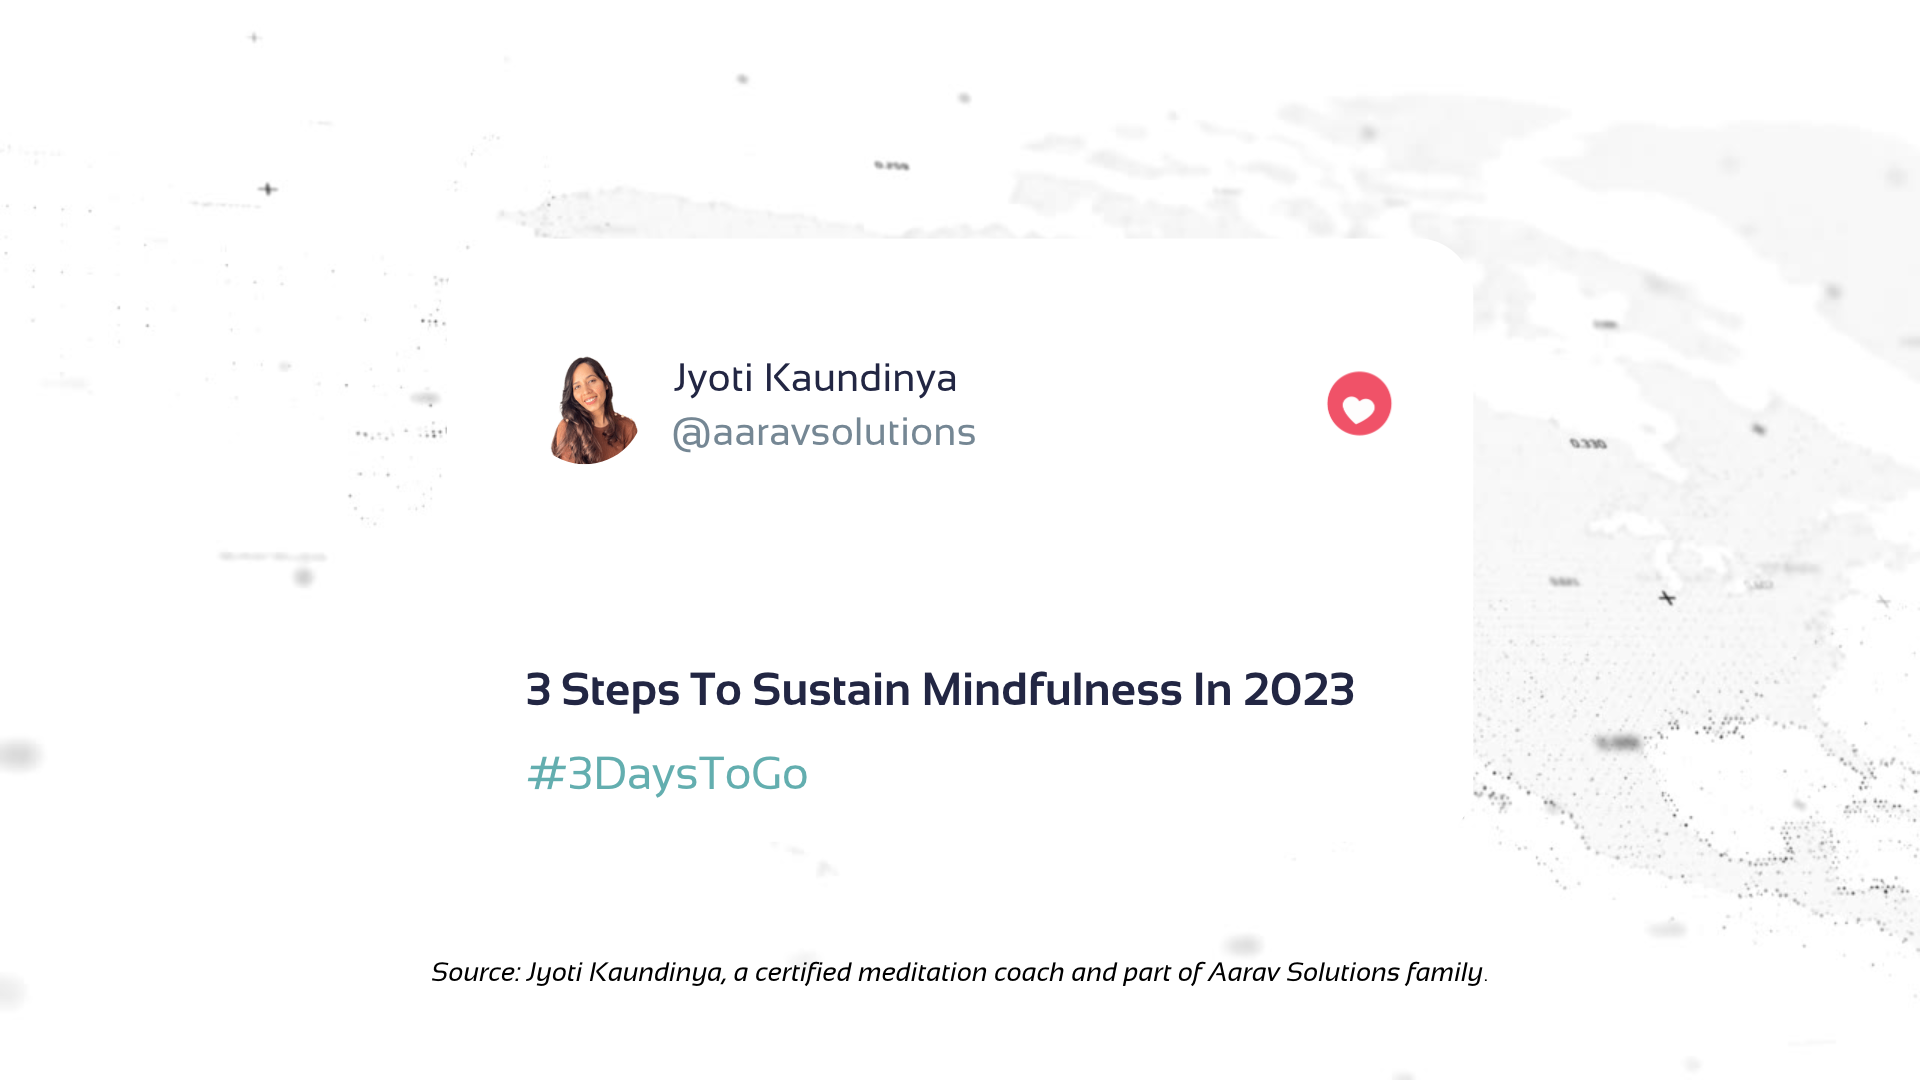 3 Steps To Sustain Mindfulness In The Year 2023